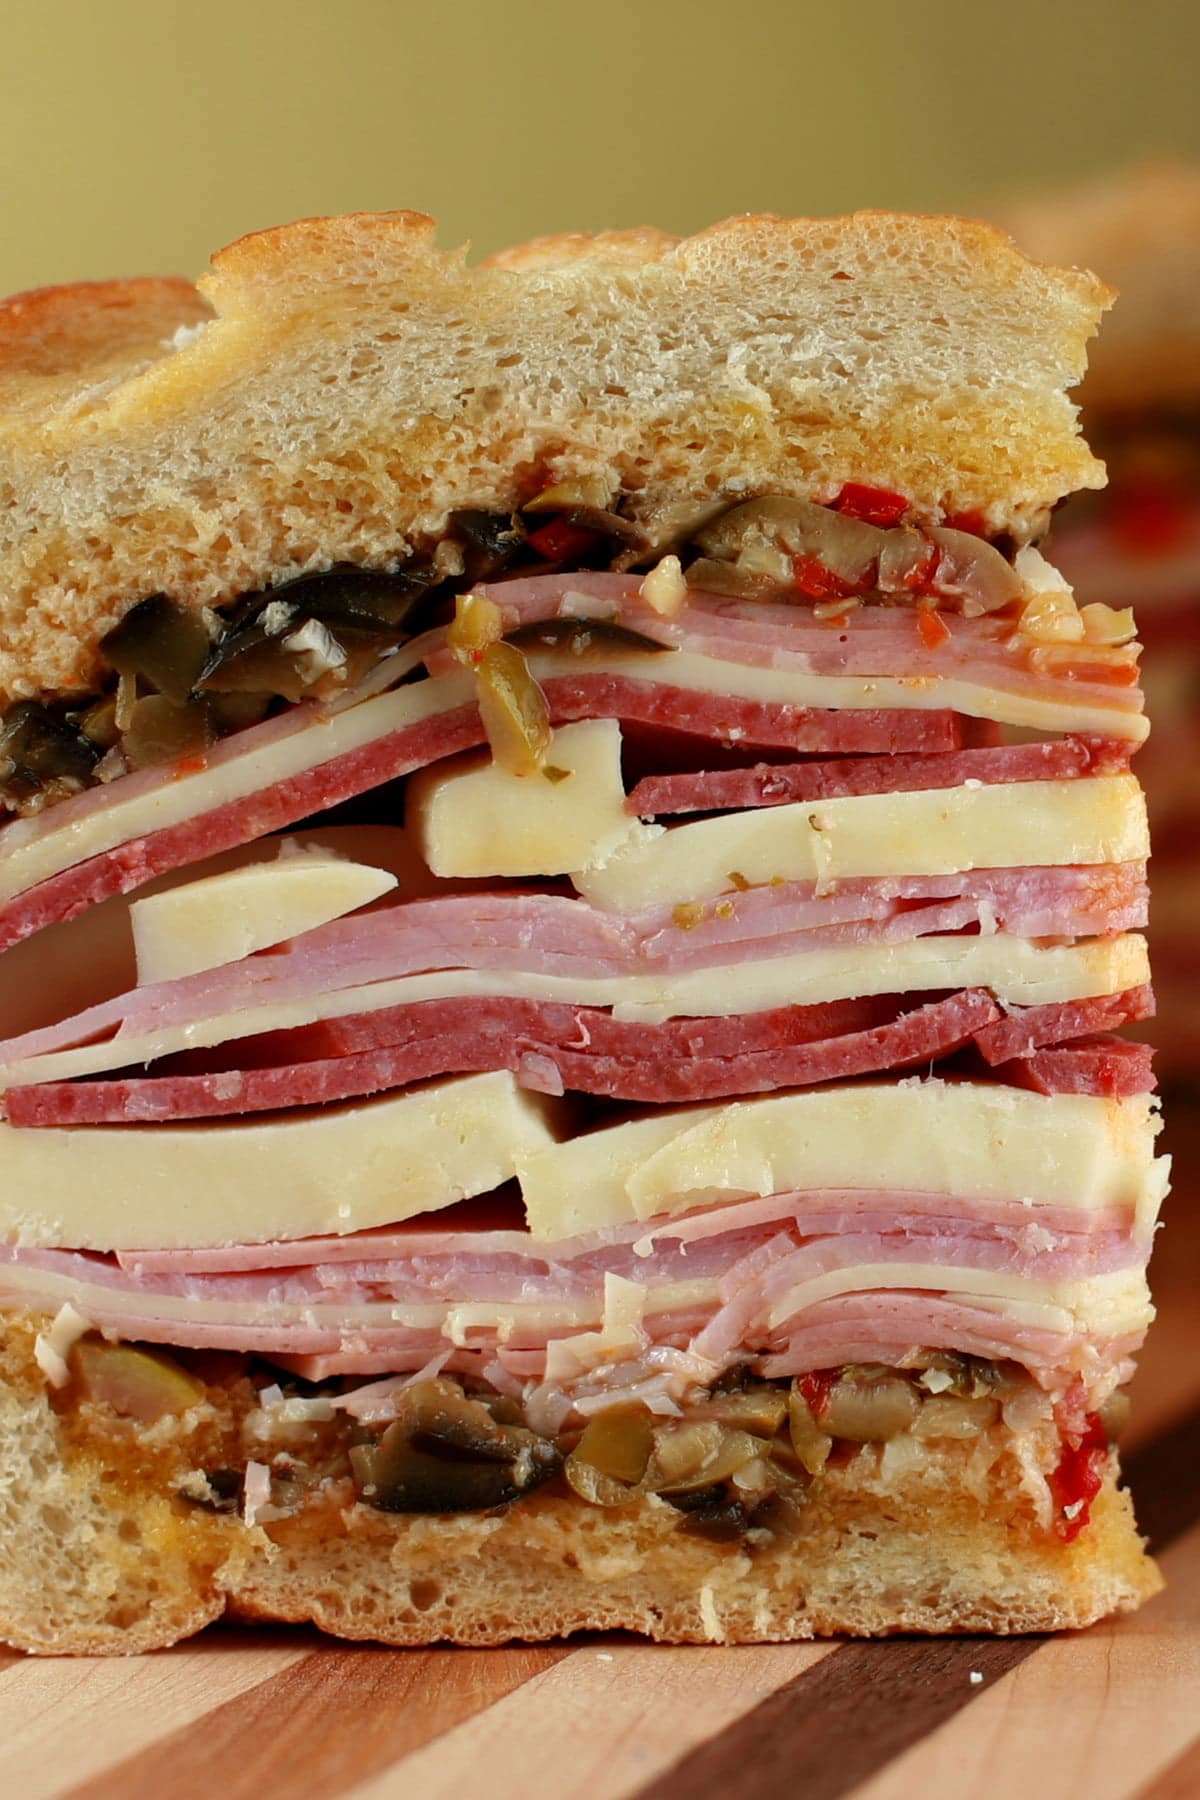 A large wedge of muffaletta sandwich: A full loaf of bread, stuffed with many layers of meats, cheeses, and olive salad.